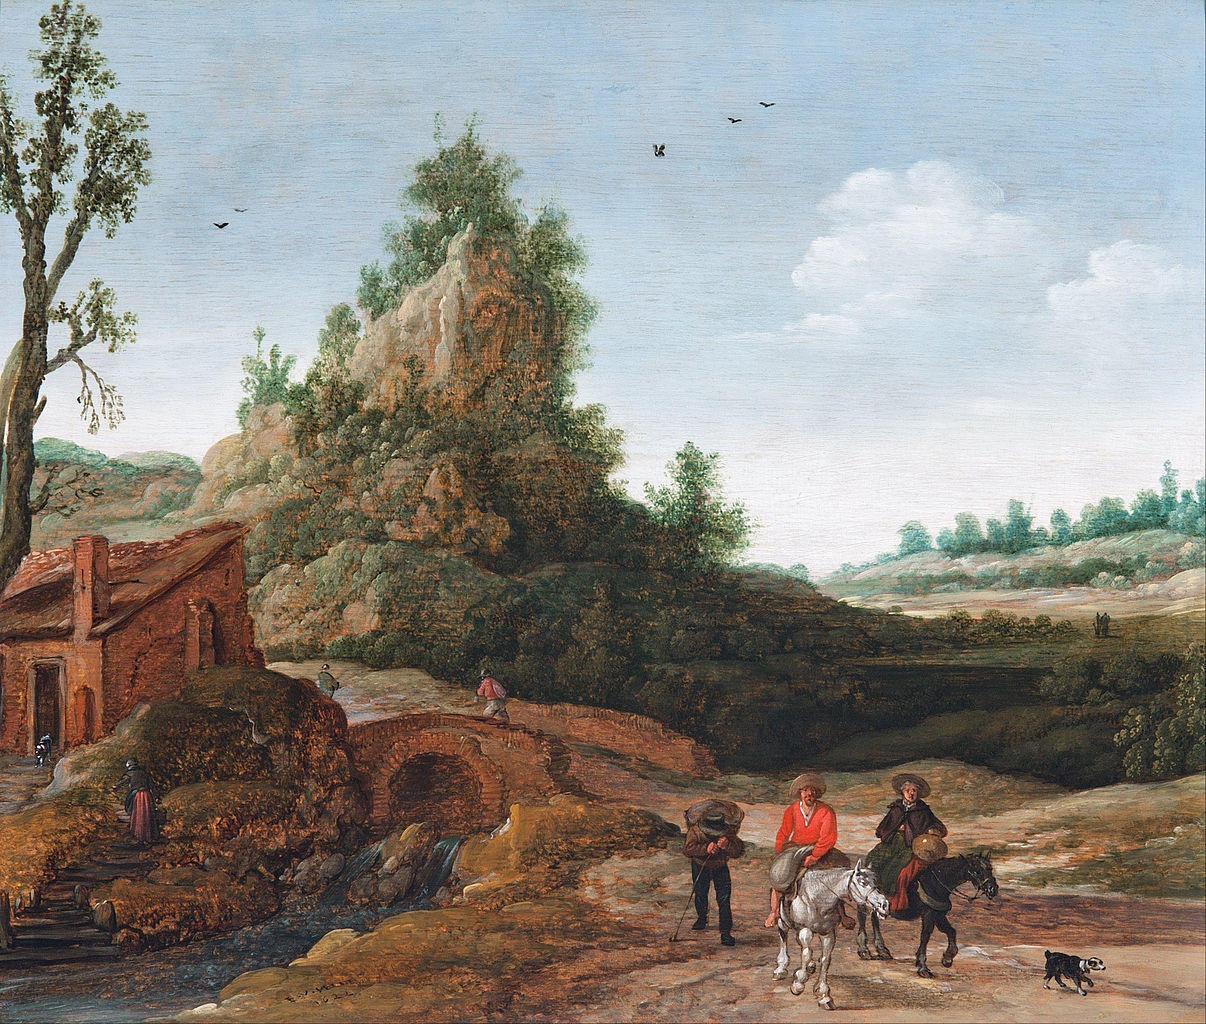 https://upload.wikimedia.org/wikipedia/commons/thumb/c/c5/Esaias_van_de_Velde_-_A_landscape_with_travellers_crossing_a_bridge_before_a_small_dwelling%2C_horsemen_in_the_foreground_-_Google_Art_Project.jpg/1206px-Esaias_van_de_Velde_-_A_landscape_with_travellers_crossing_a_bridge_before_a_small_dwelling%2C_horsemen_in_the_foreground_-_Google_Art_Project.jpg